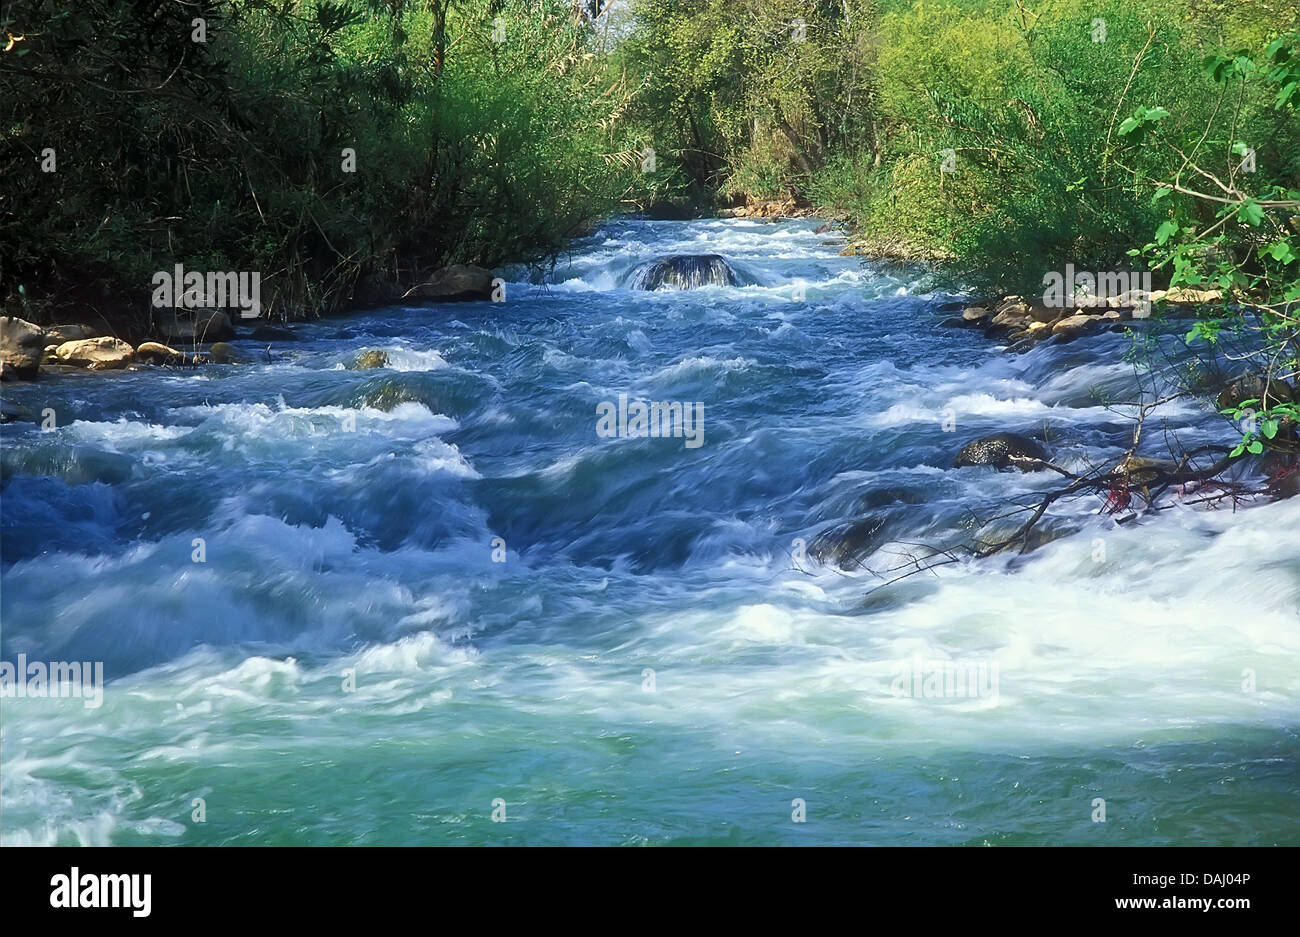 Banias river in Northern Israel Stock Photo